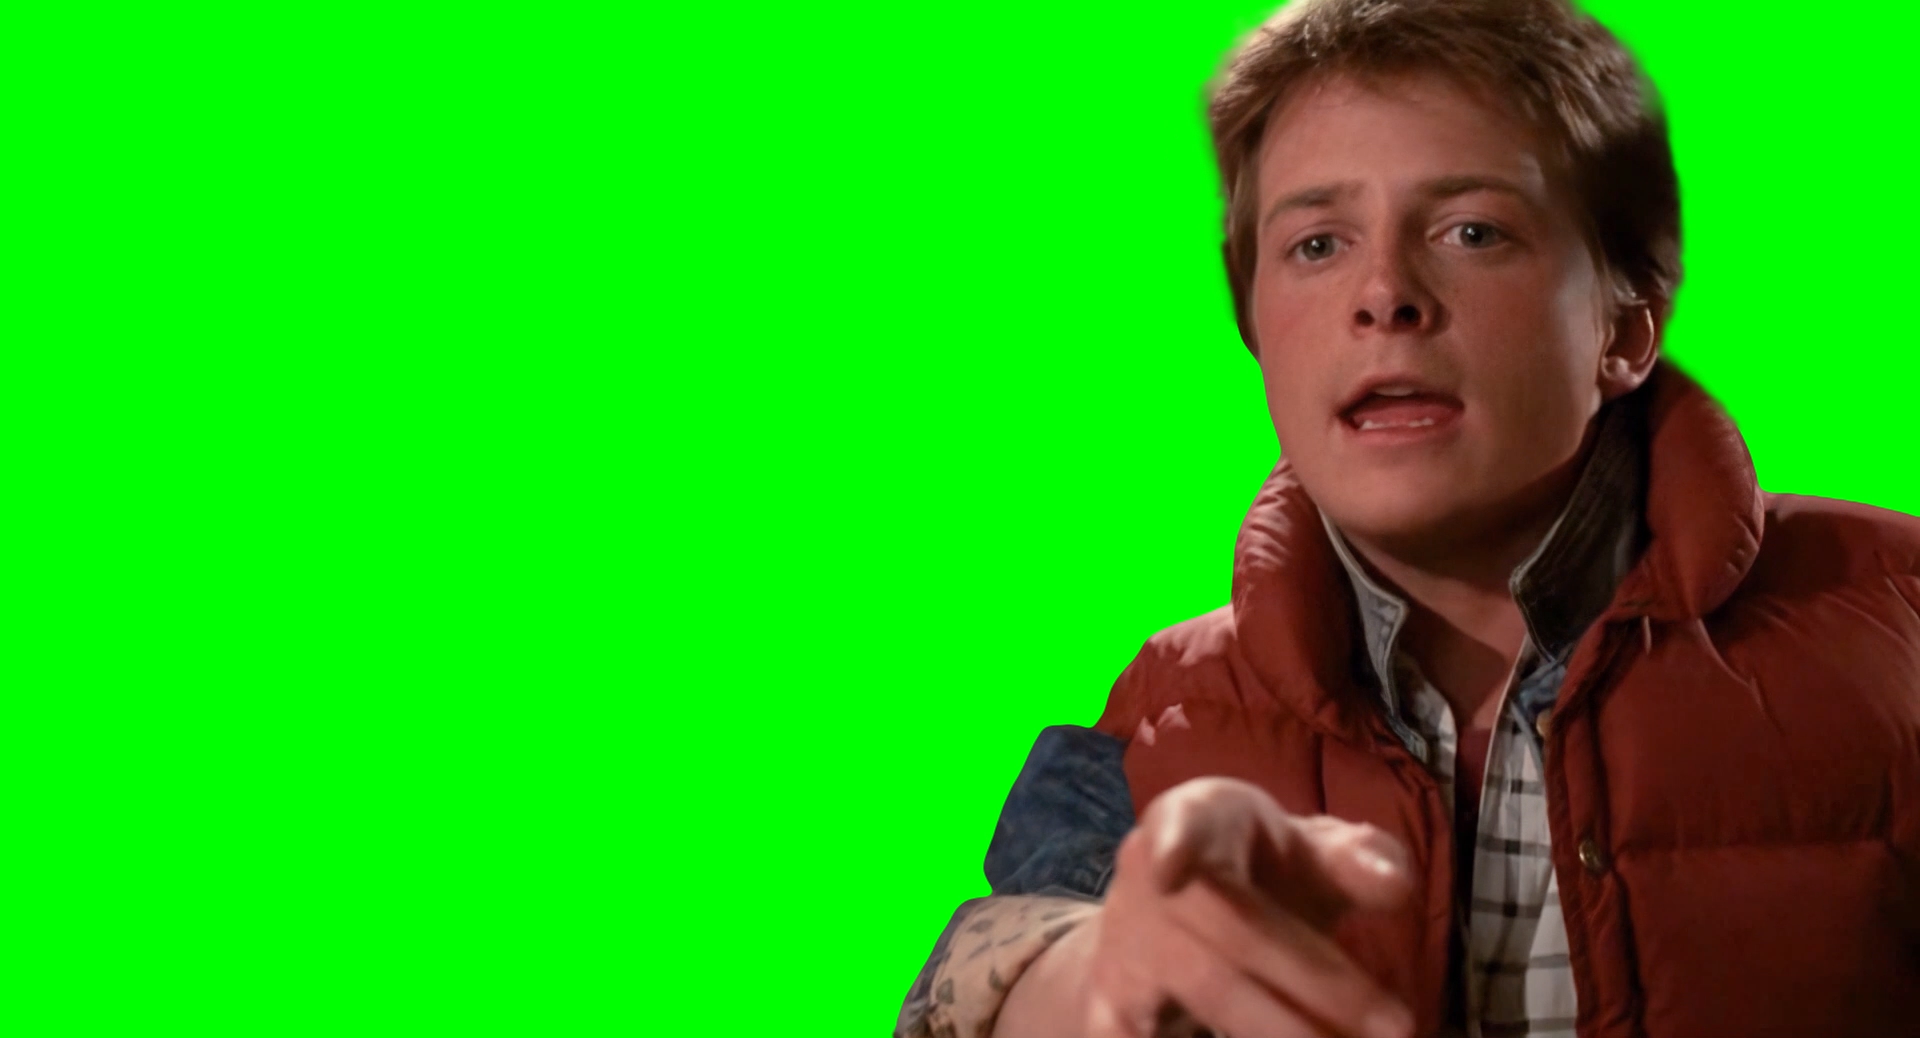 Hey! I’ve seen this one, this is a classic! - Marty McFly meme (Green Screen)